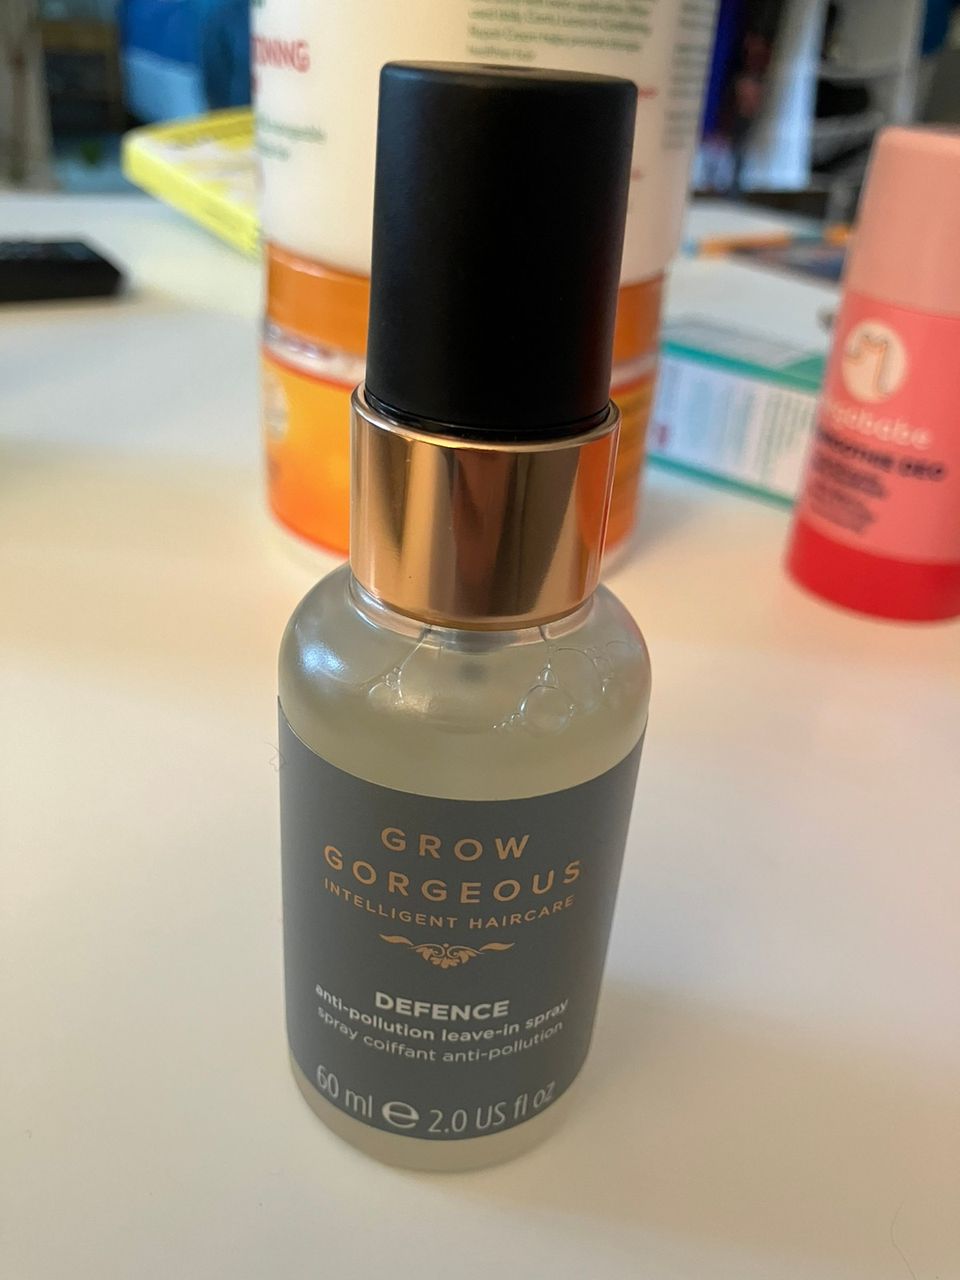 Grow gorgeous Anti-pollution leave-in spray